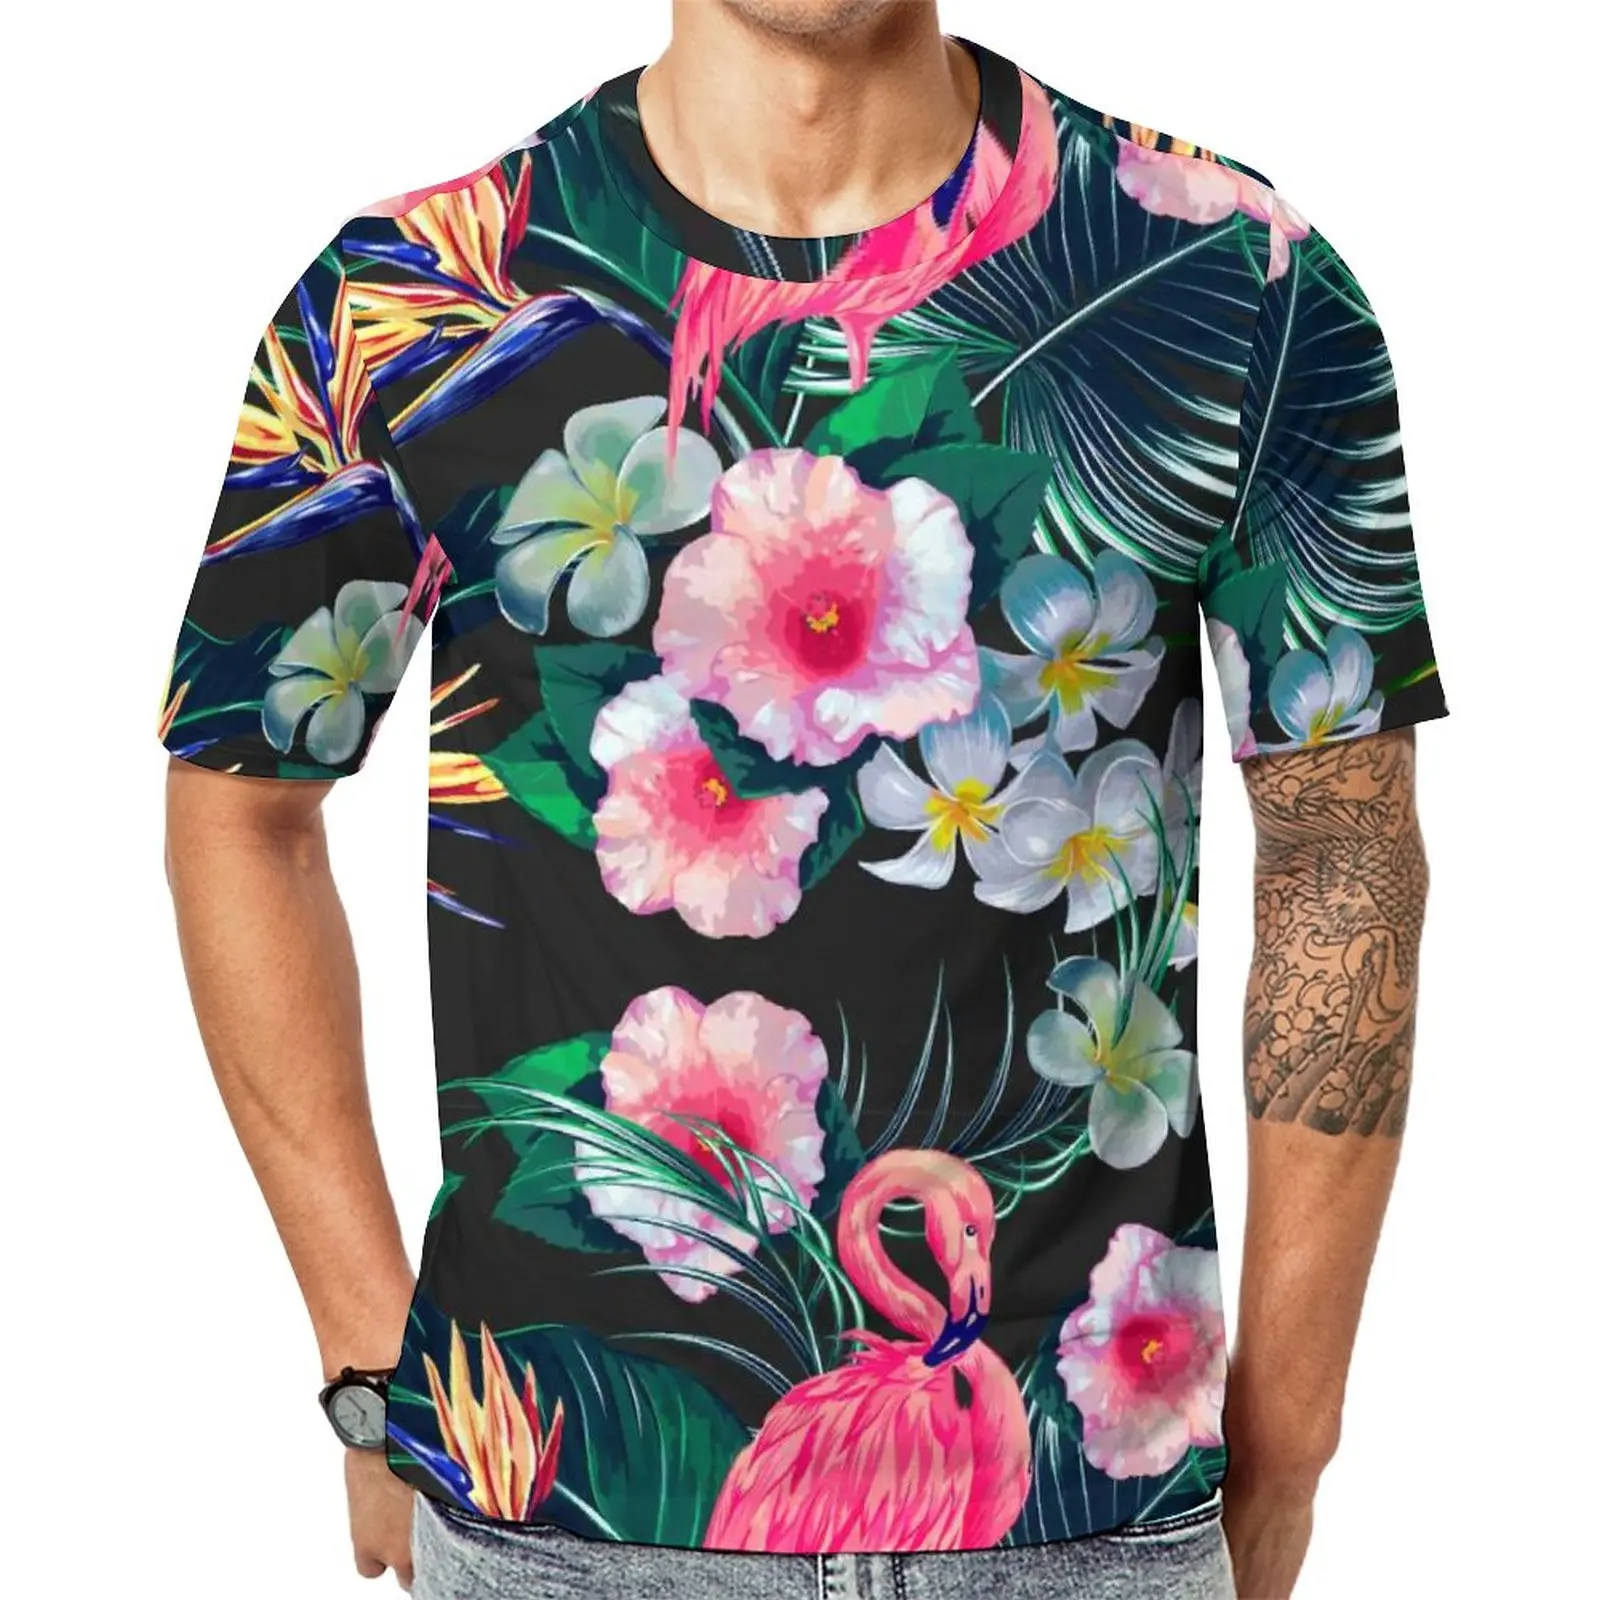 

Forest Palm Leaves T Shirt Floral and Flamingo Print Men Fashion T-Shirts Summer Printed Tees Short Sleeves Casual Big Size Tops